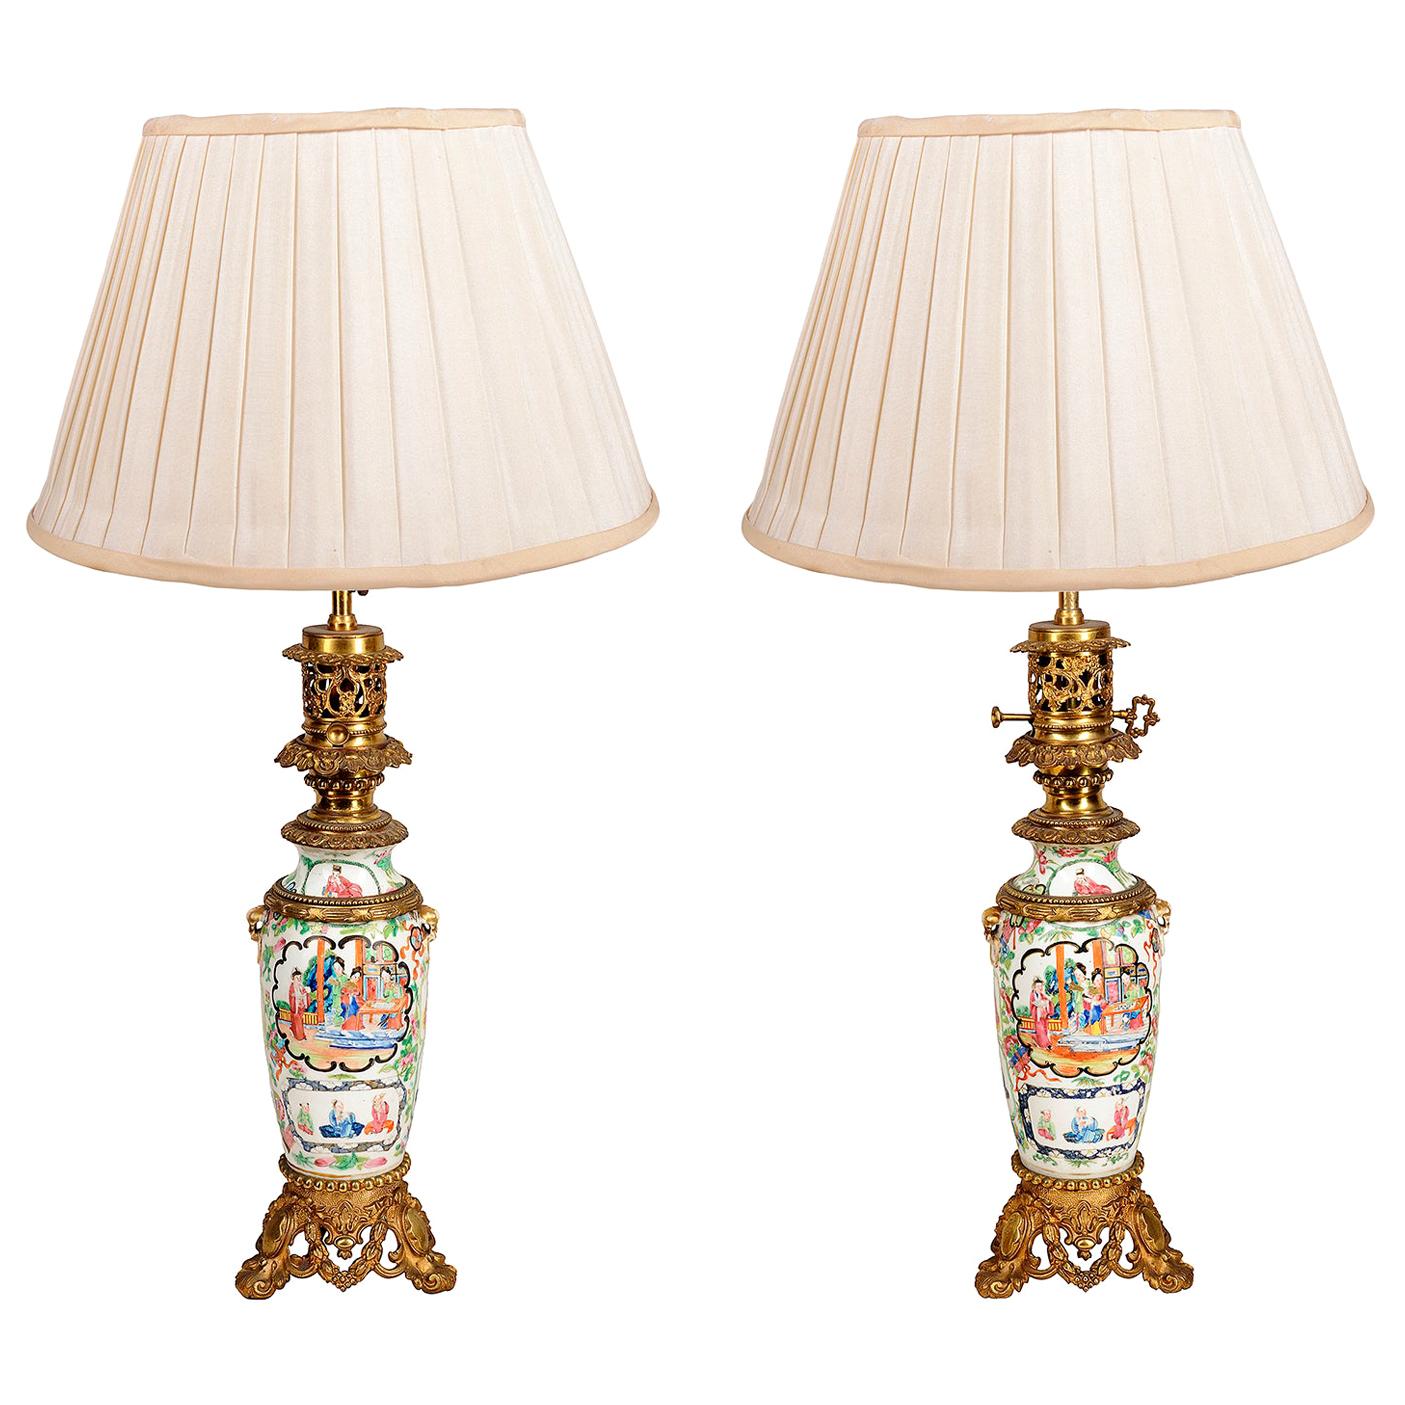 Pair of 19th Century Rose Medallion Vases / Lamps For Sale